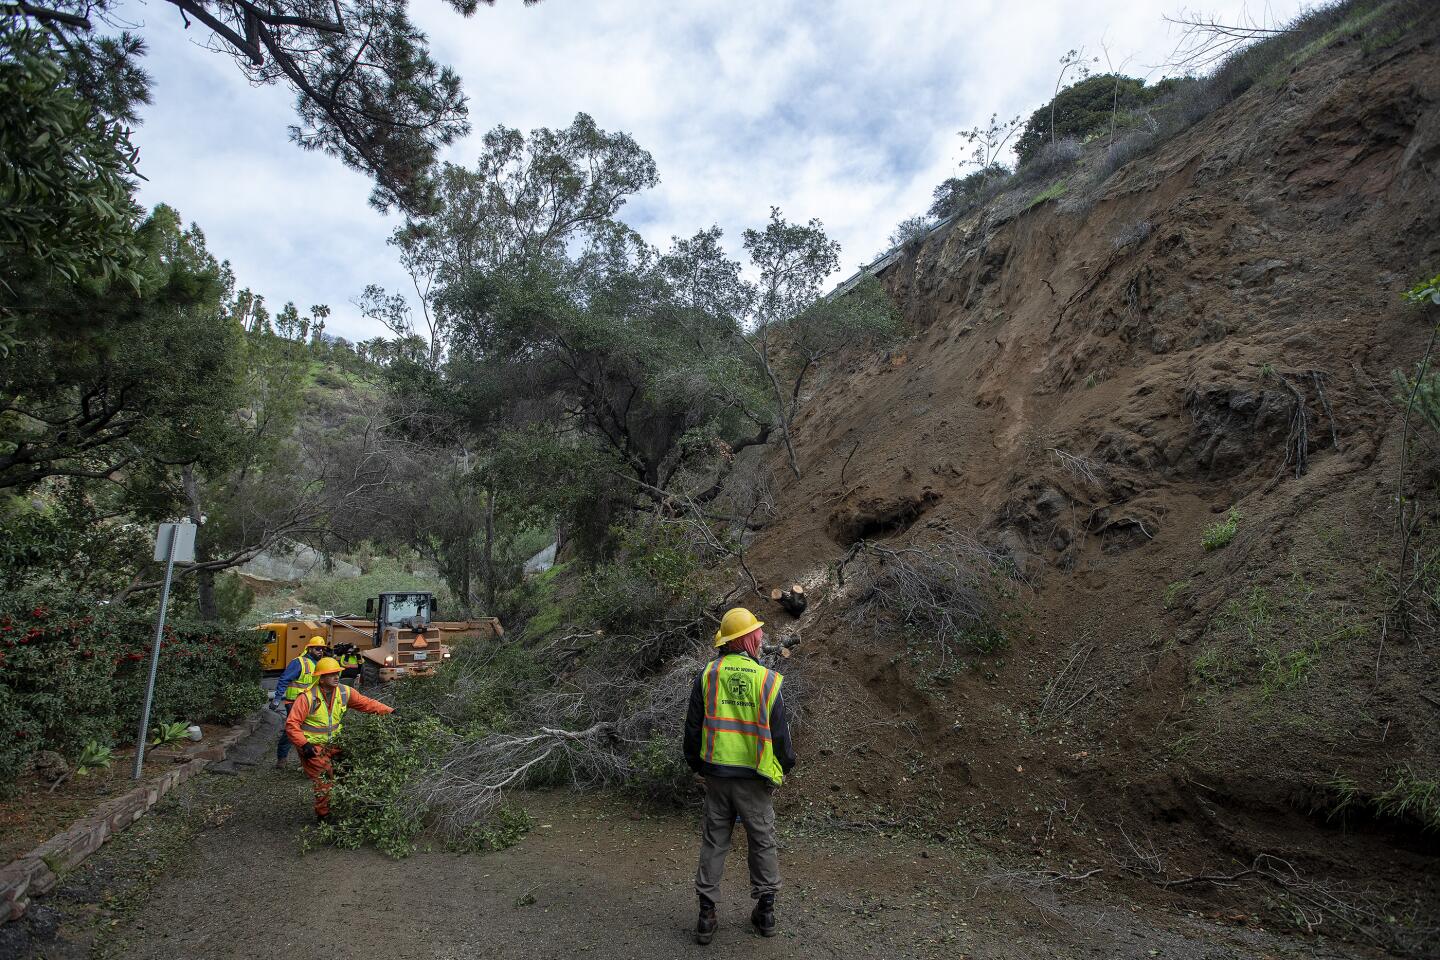 City of Los Angeles Bureau of Street Services workers remove branches from an oak tree that was destroyed due to a mudslide